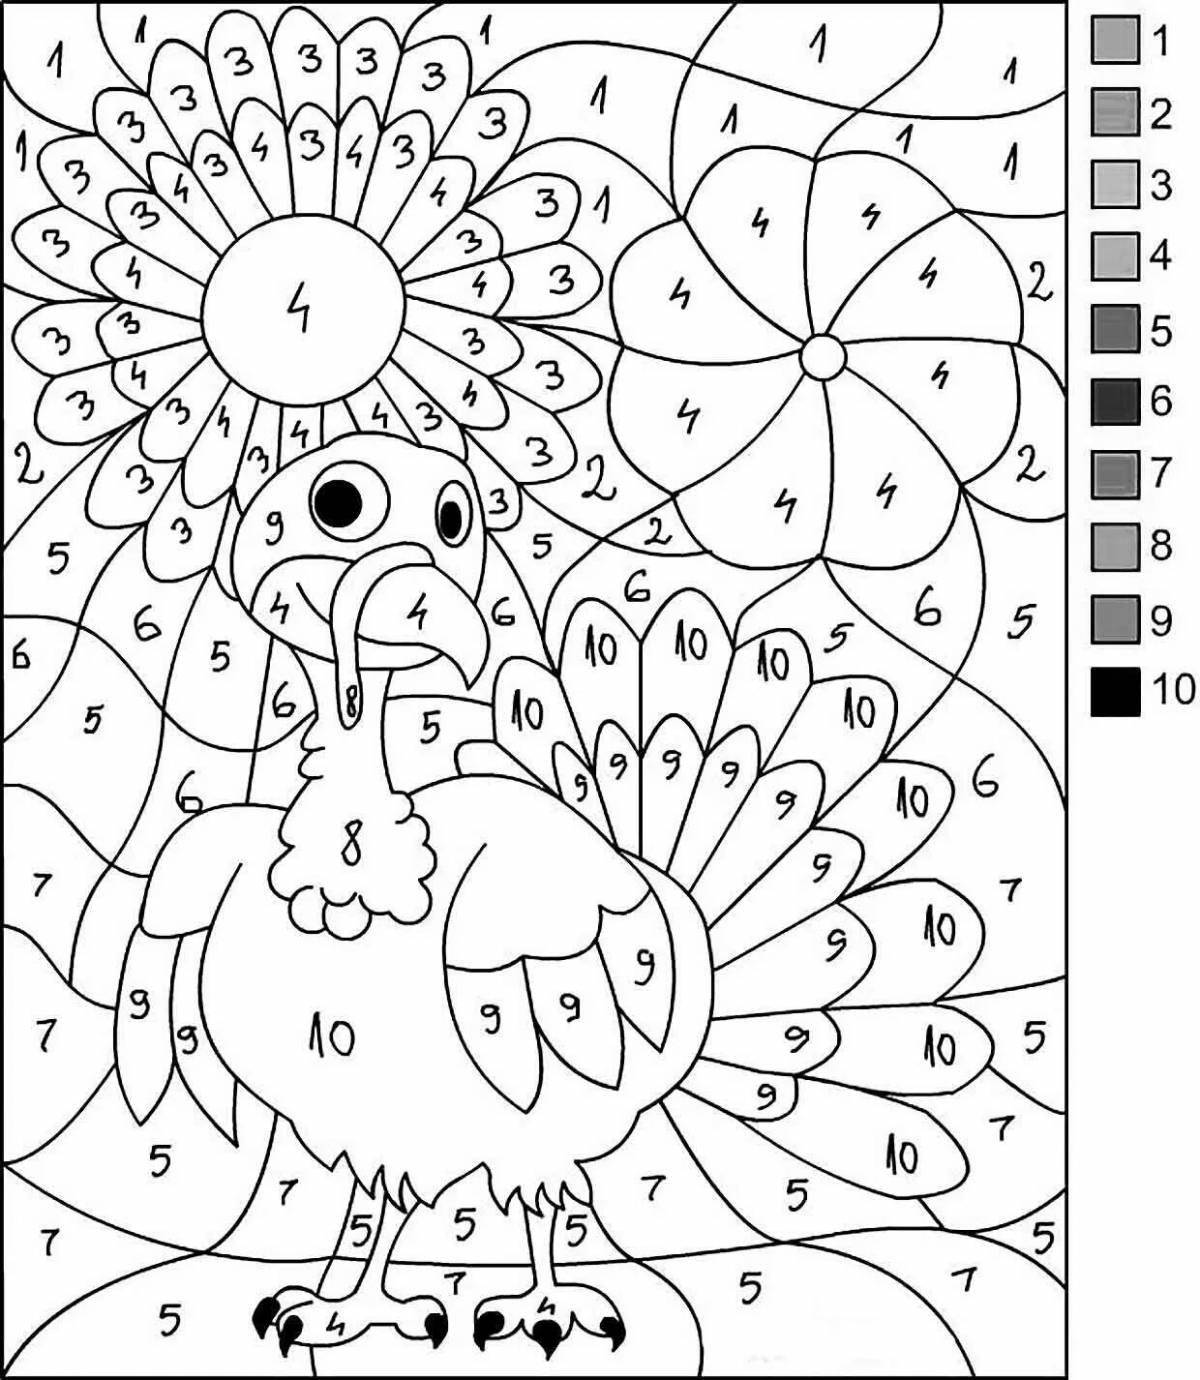 Intriguing coloring book with small numbers